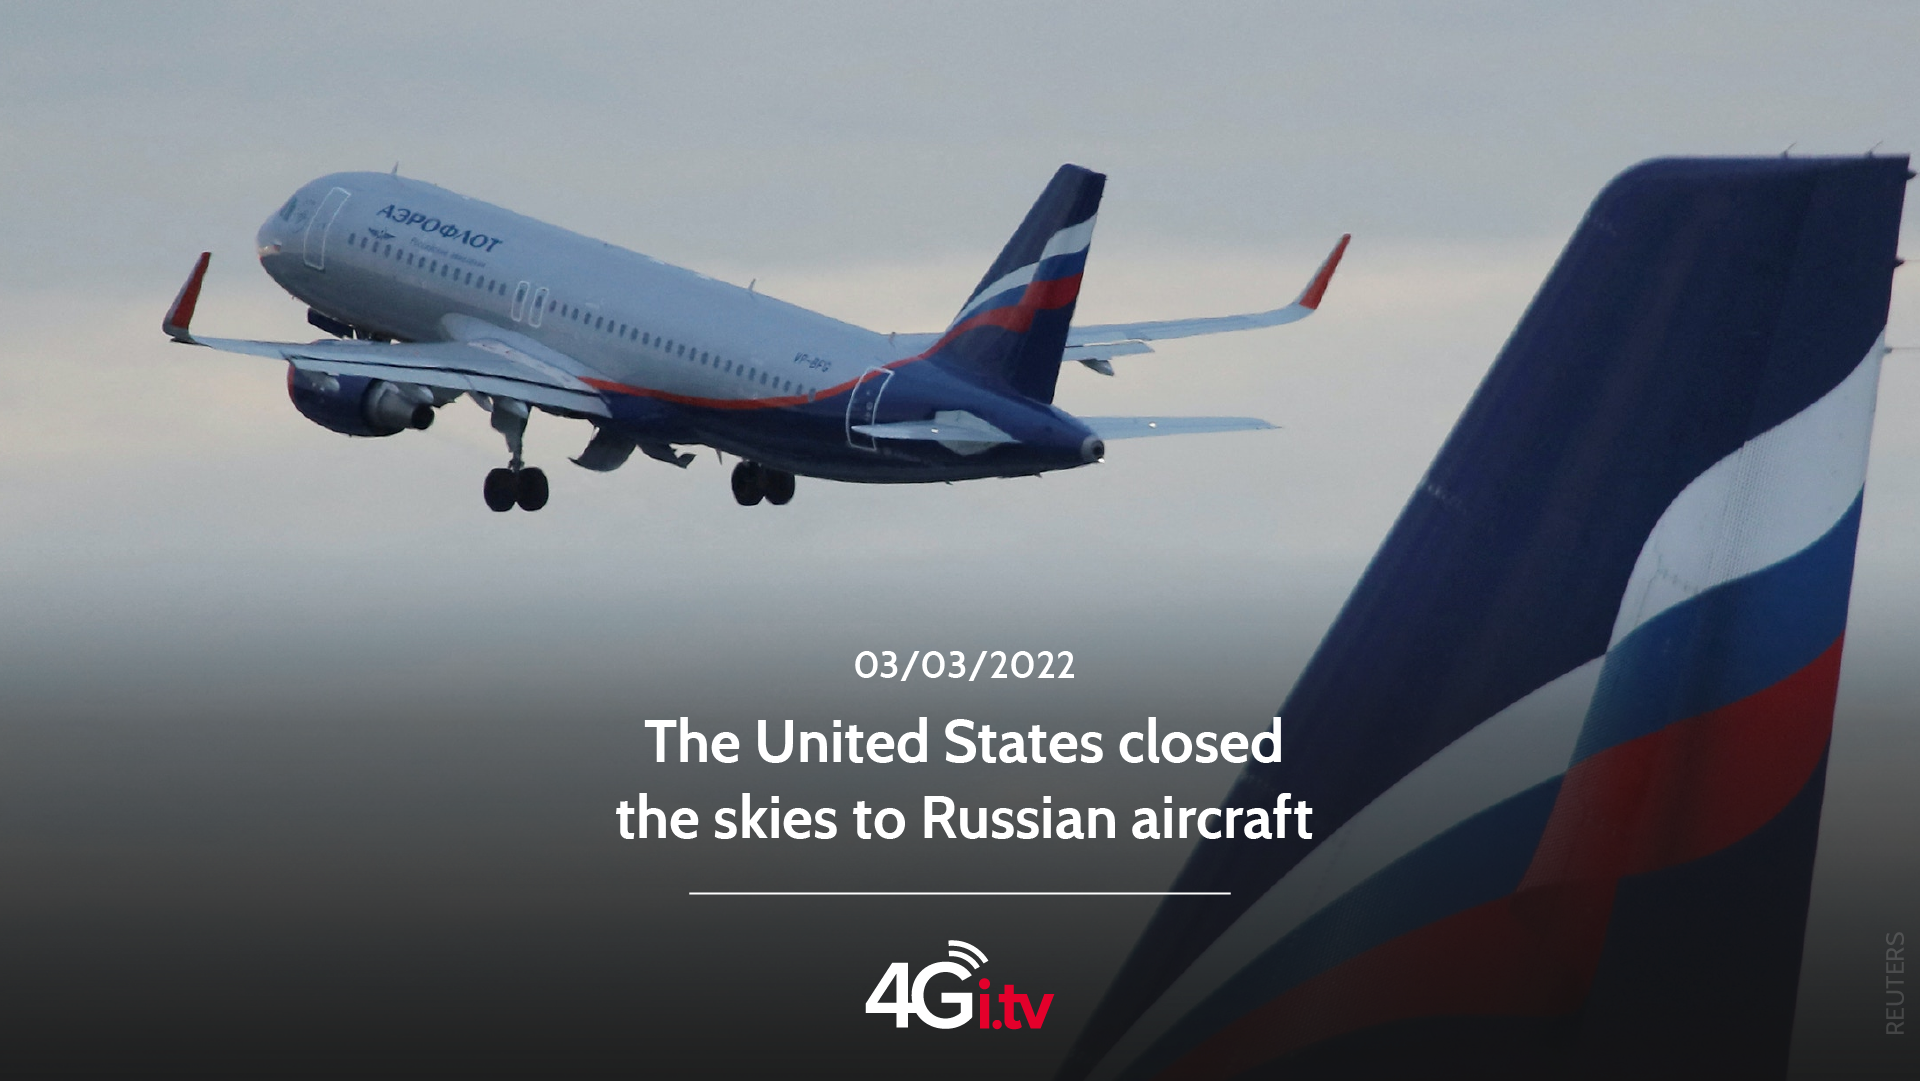 Подробнее о статье The United States closed the skies to Russian aircraft